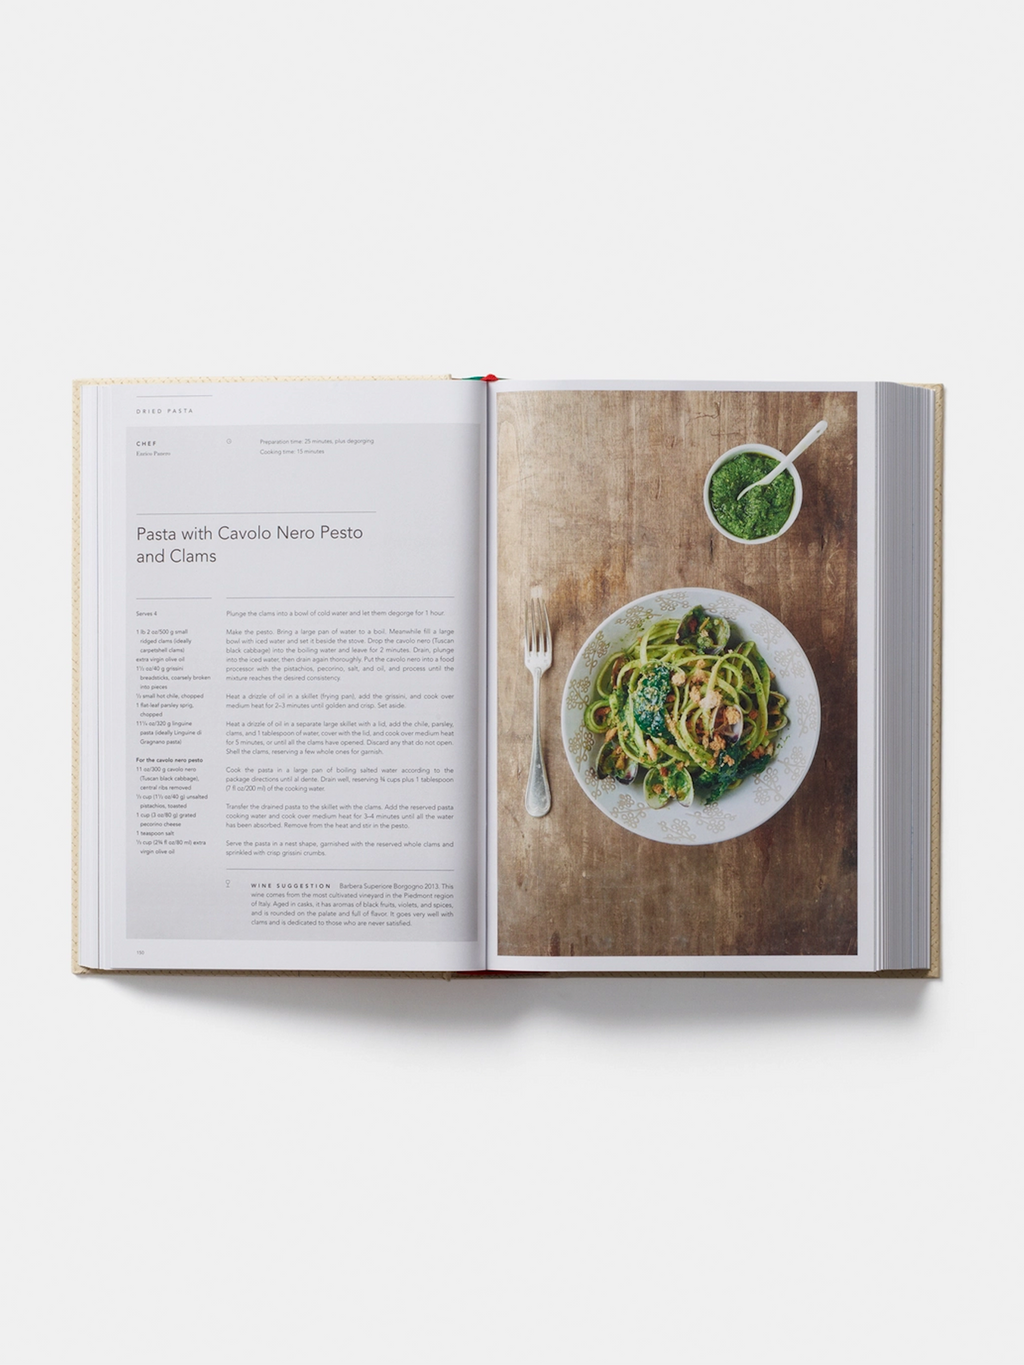 Eataly Cookbook - Stitch And Feather